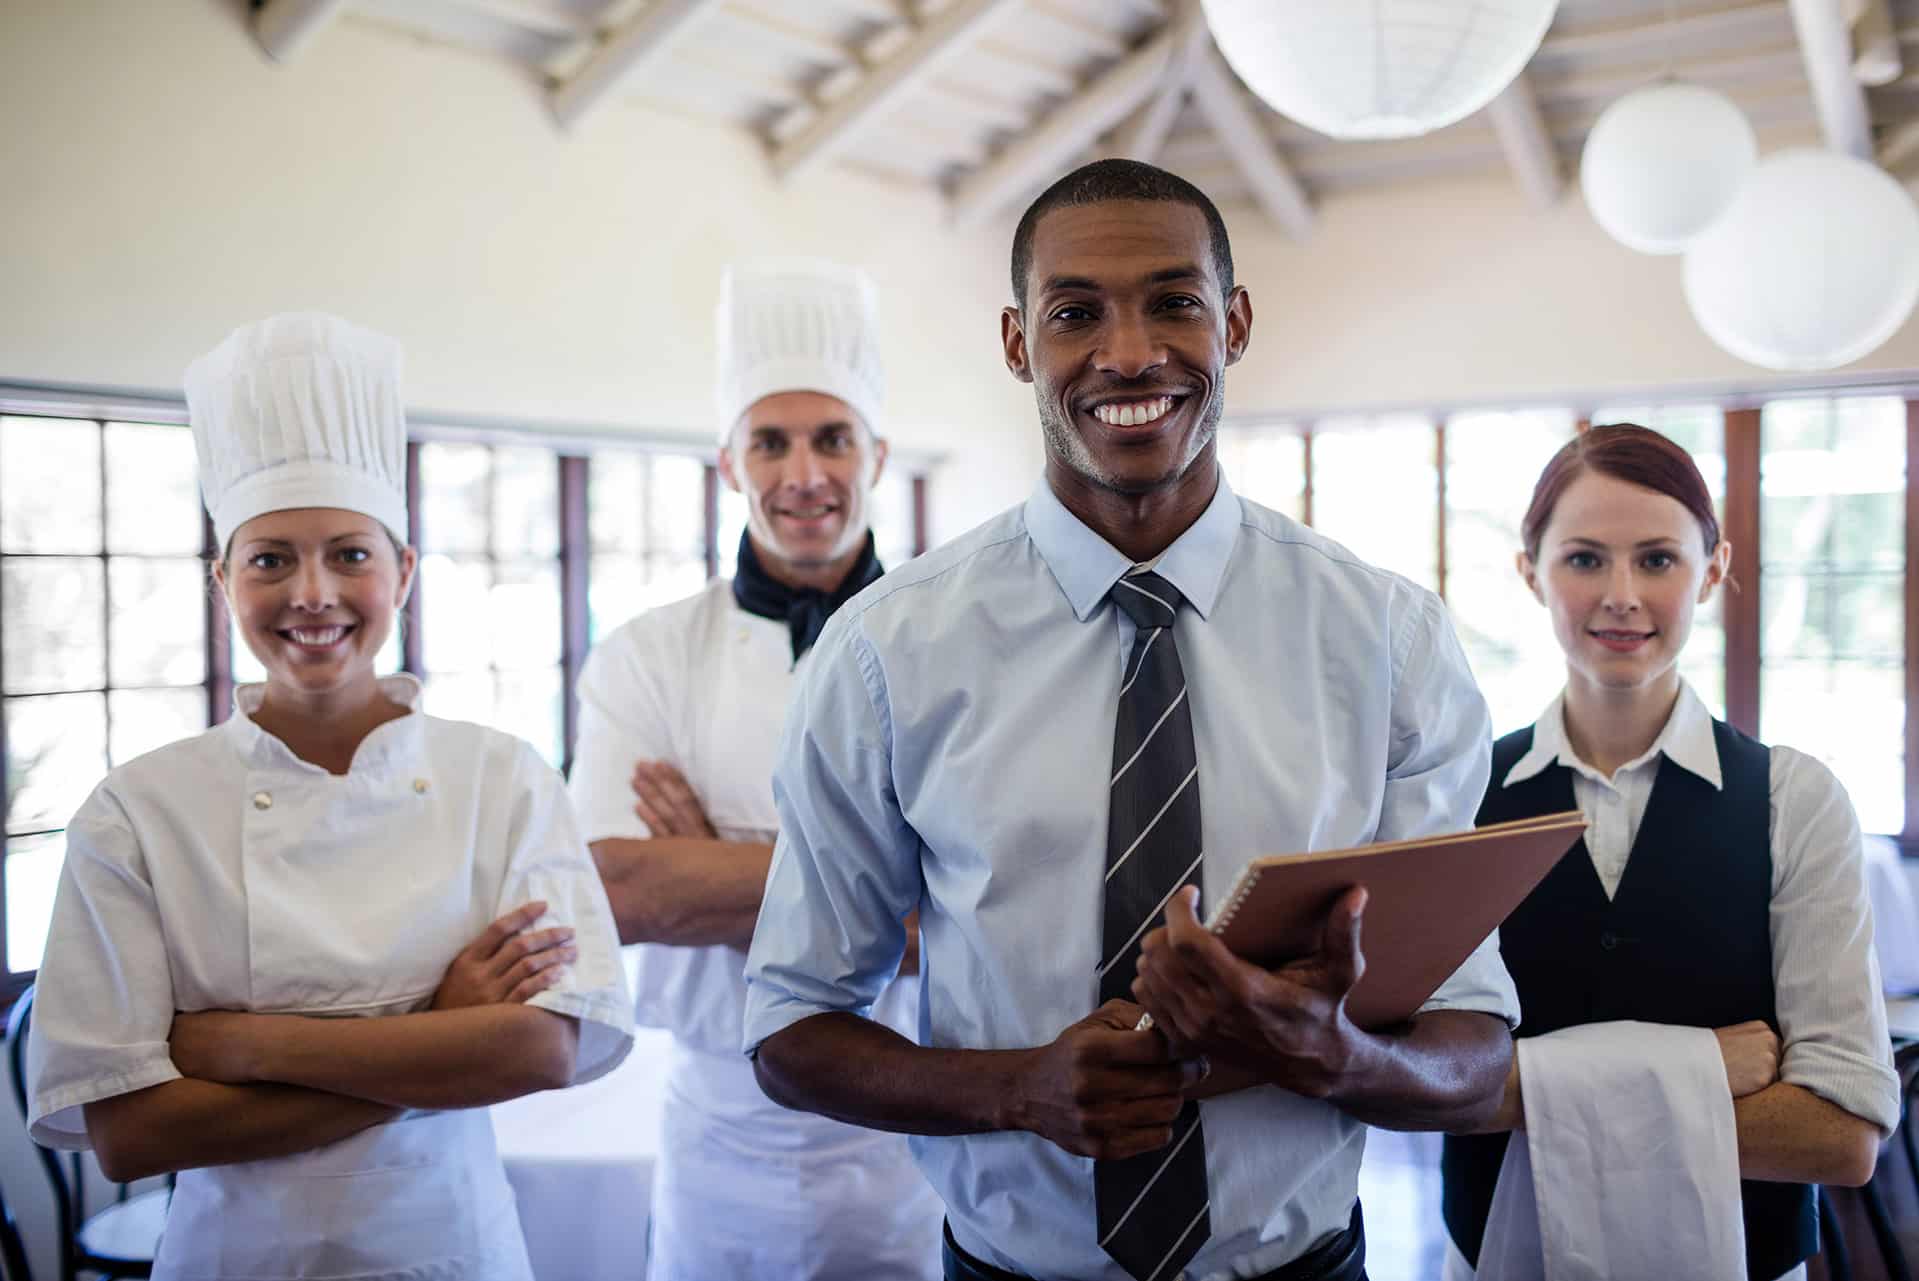 hotel restaurant staff - IT services for hotels and motels